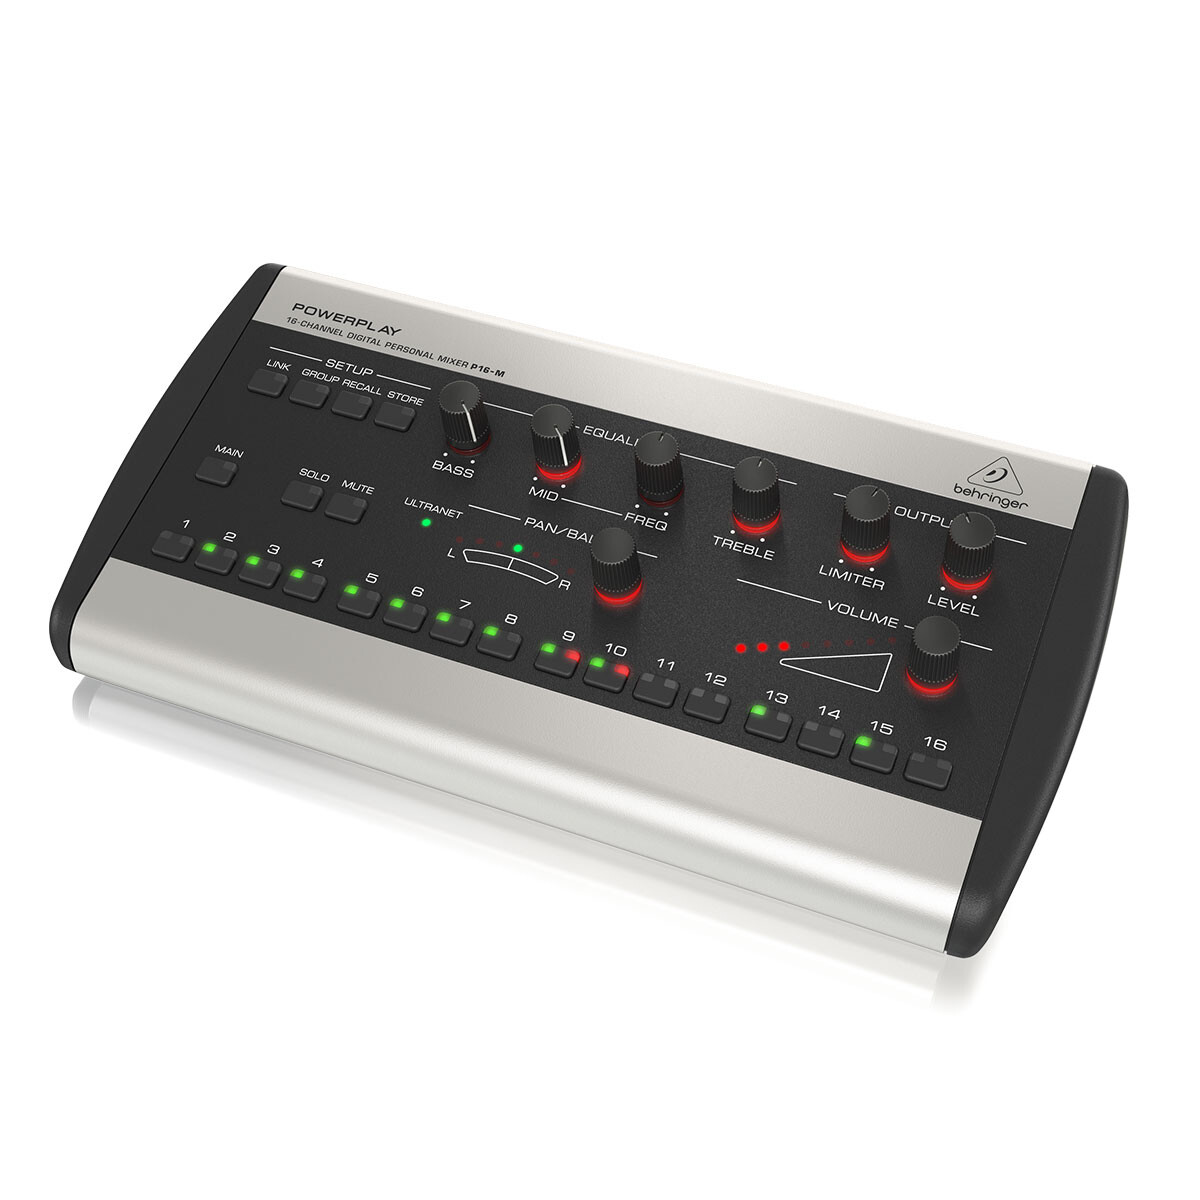 CONSOLA BEHRINGER P16M PERSONAL MONITOR X32 